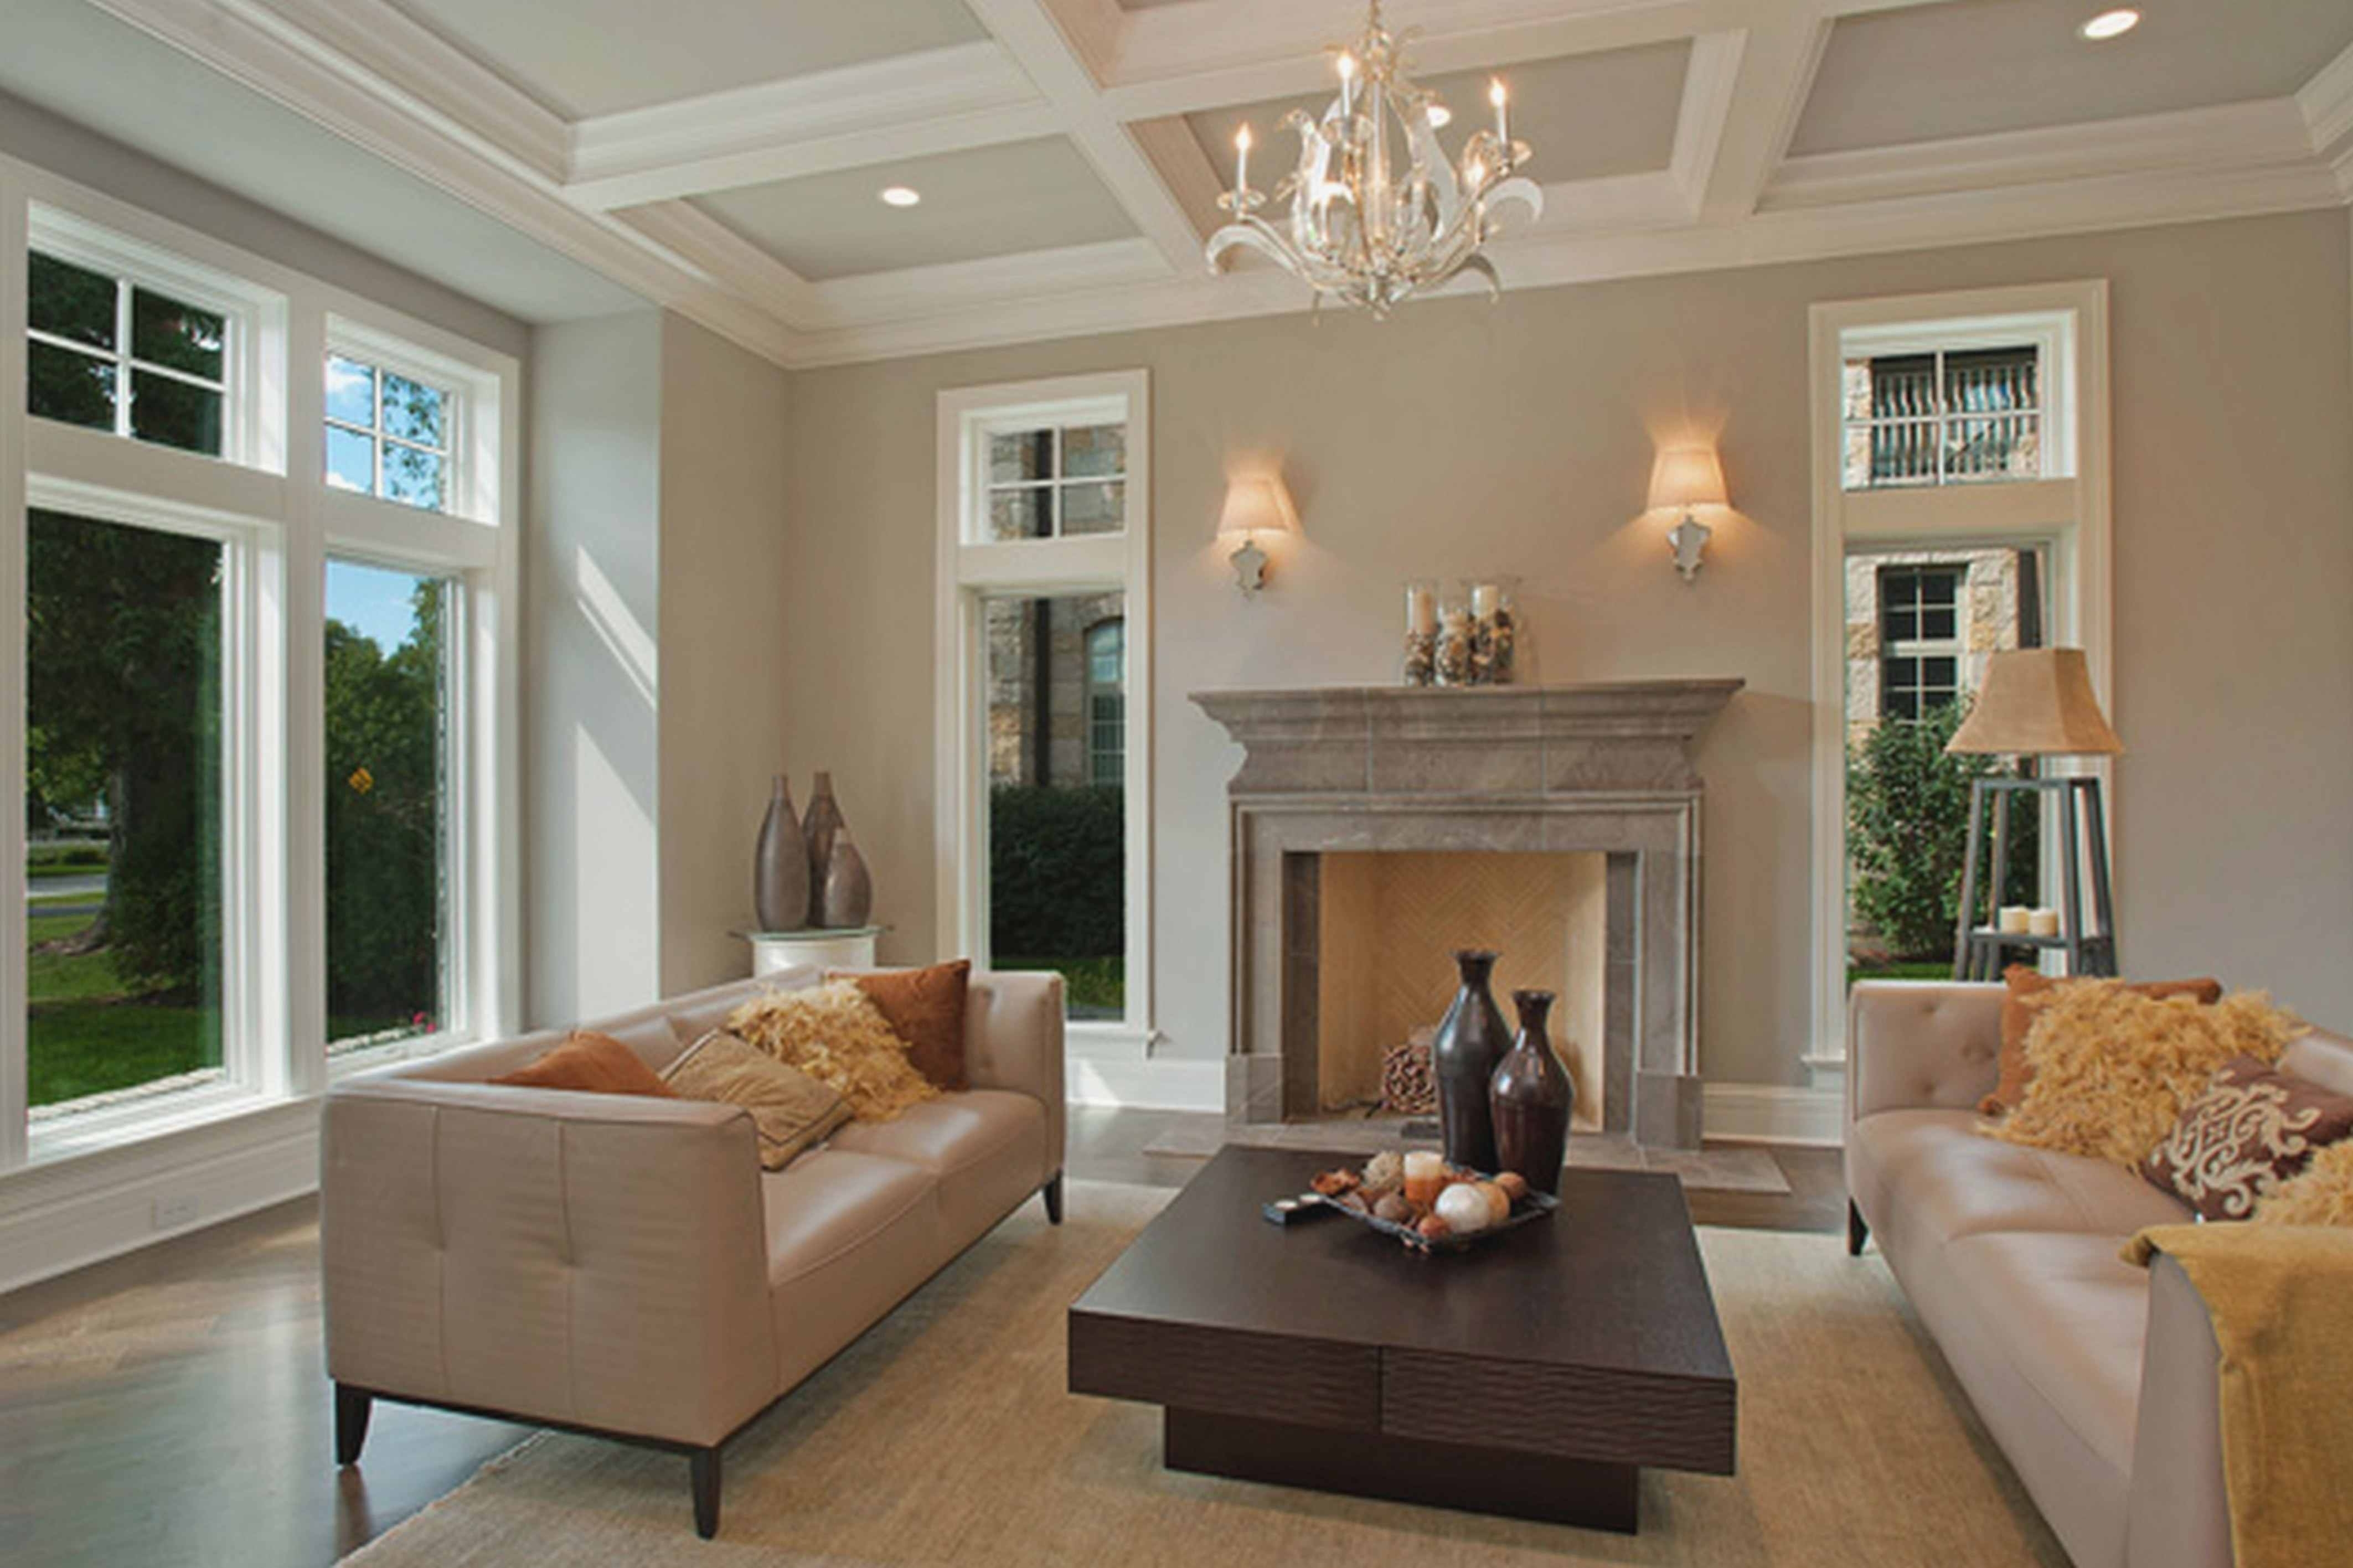 Neutral Paint Colors For Living Room A Perfect For Home's